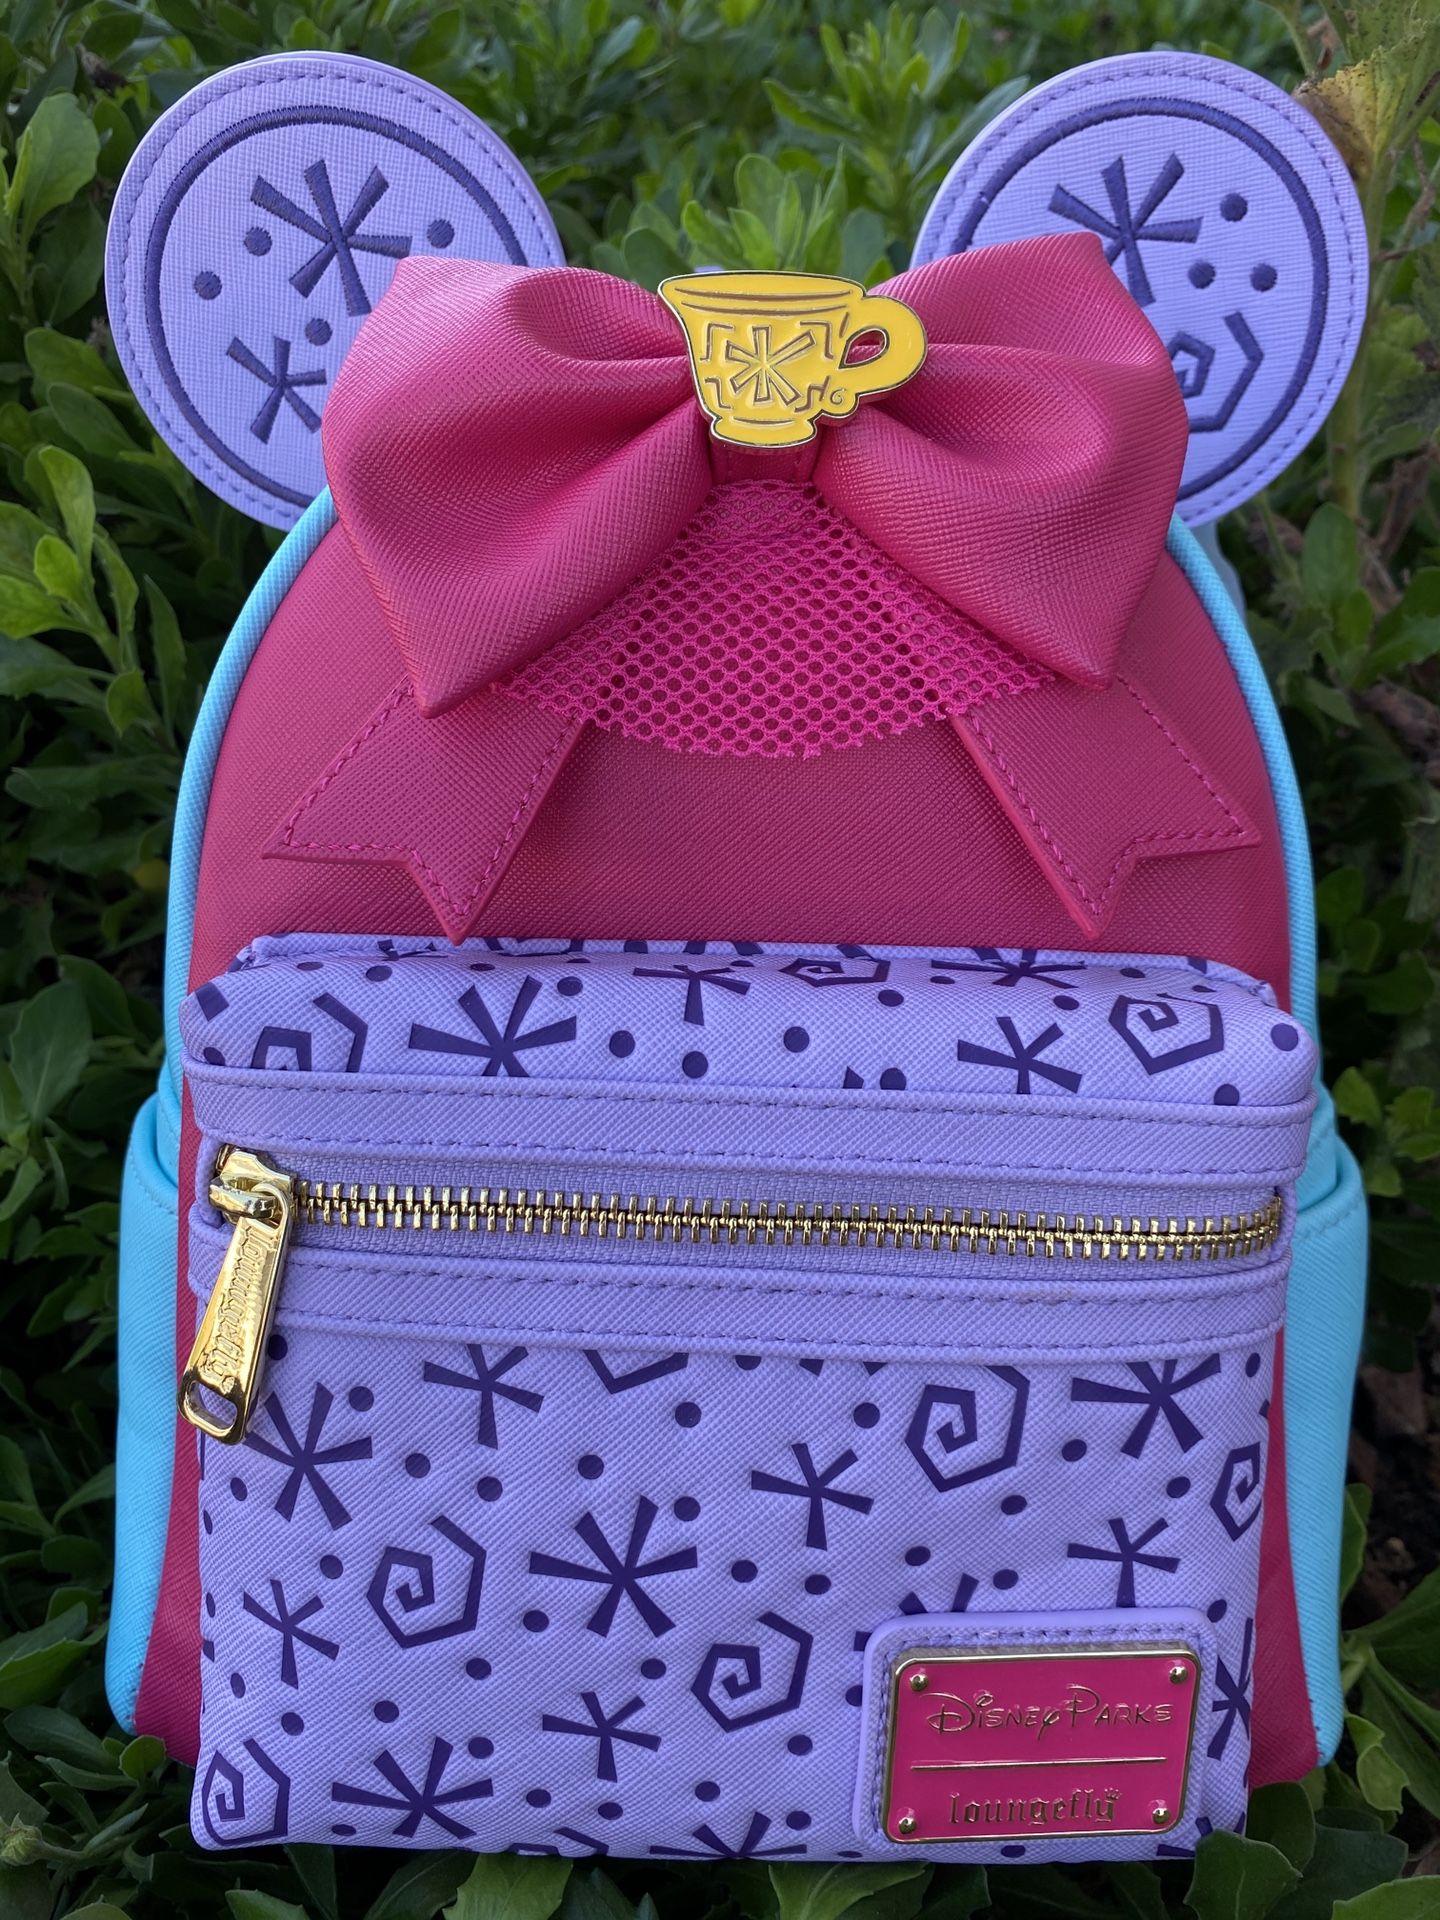 Sold Out everywhere Minnie Mouse Main Attraction series Alice in Wonderland Mad Tea Party Parks exclusive loungefly backpack